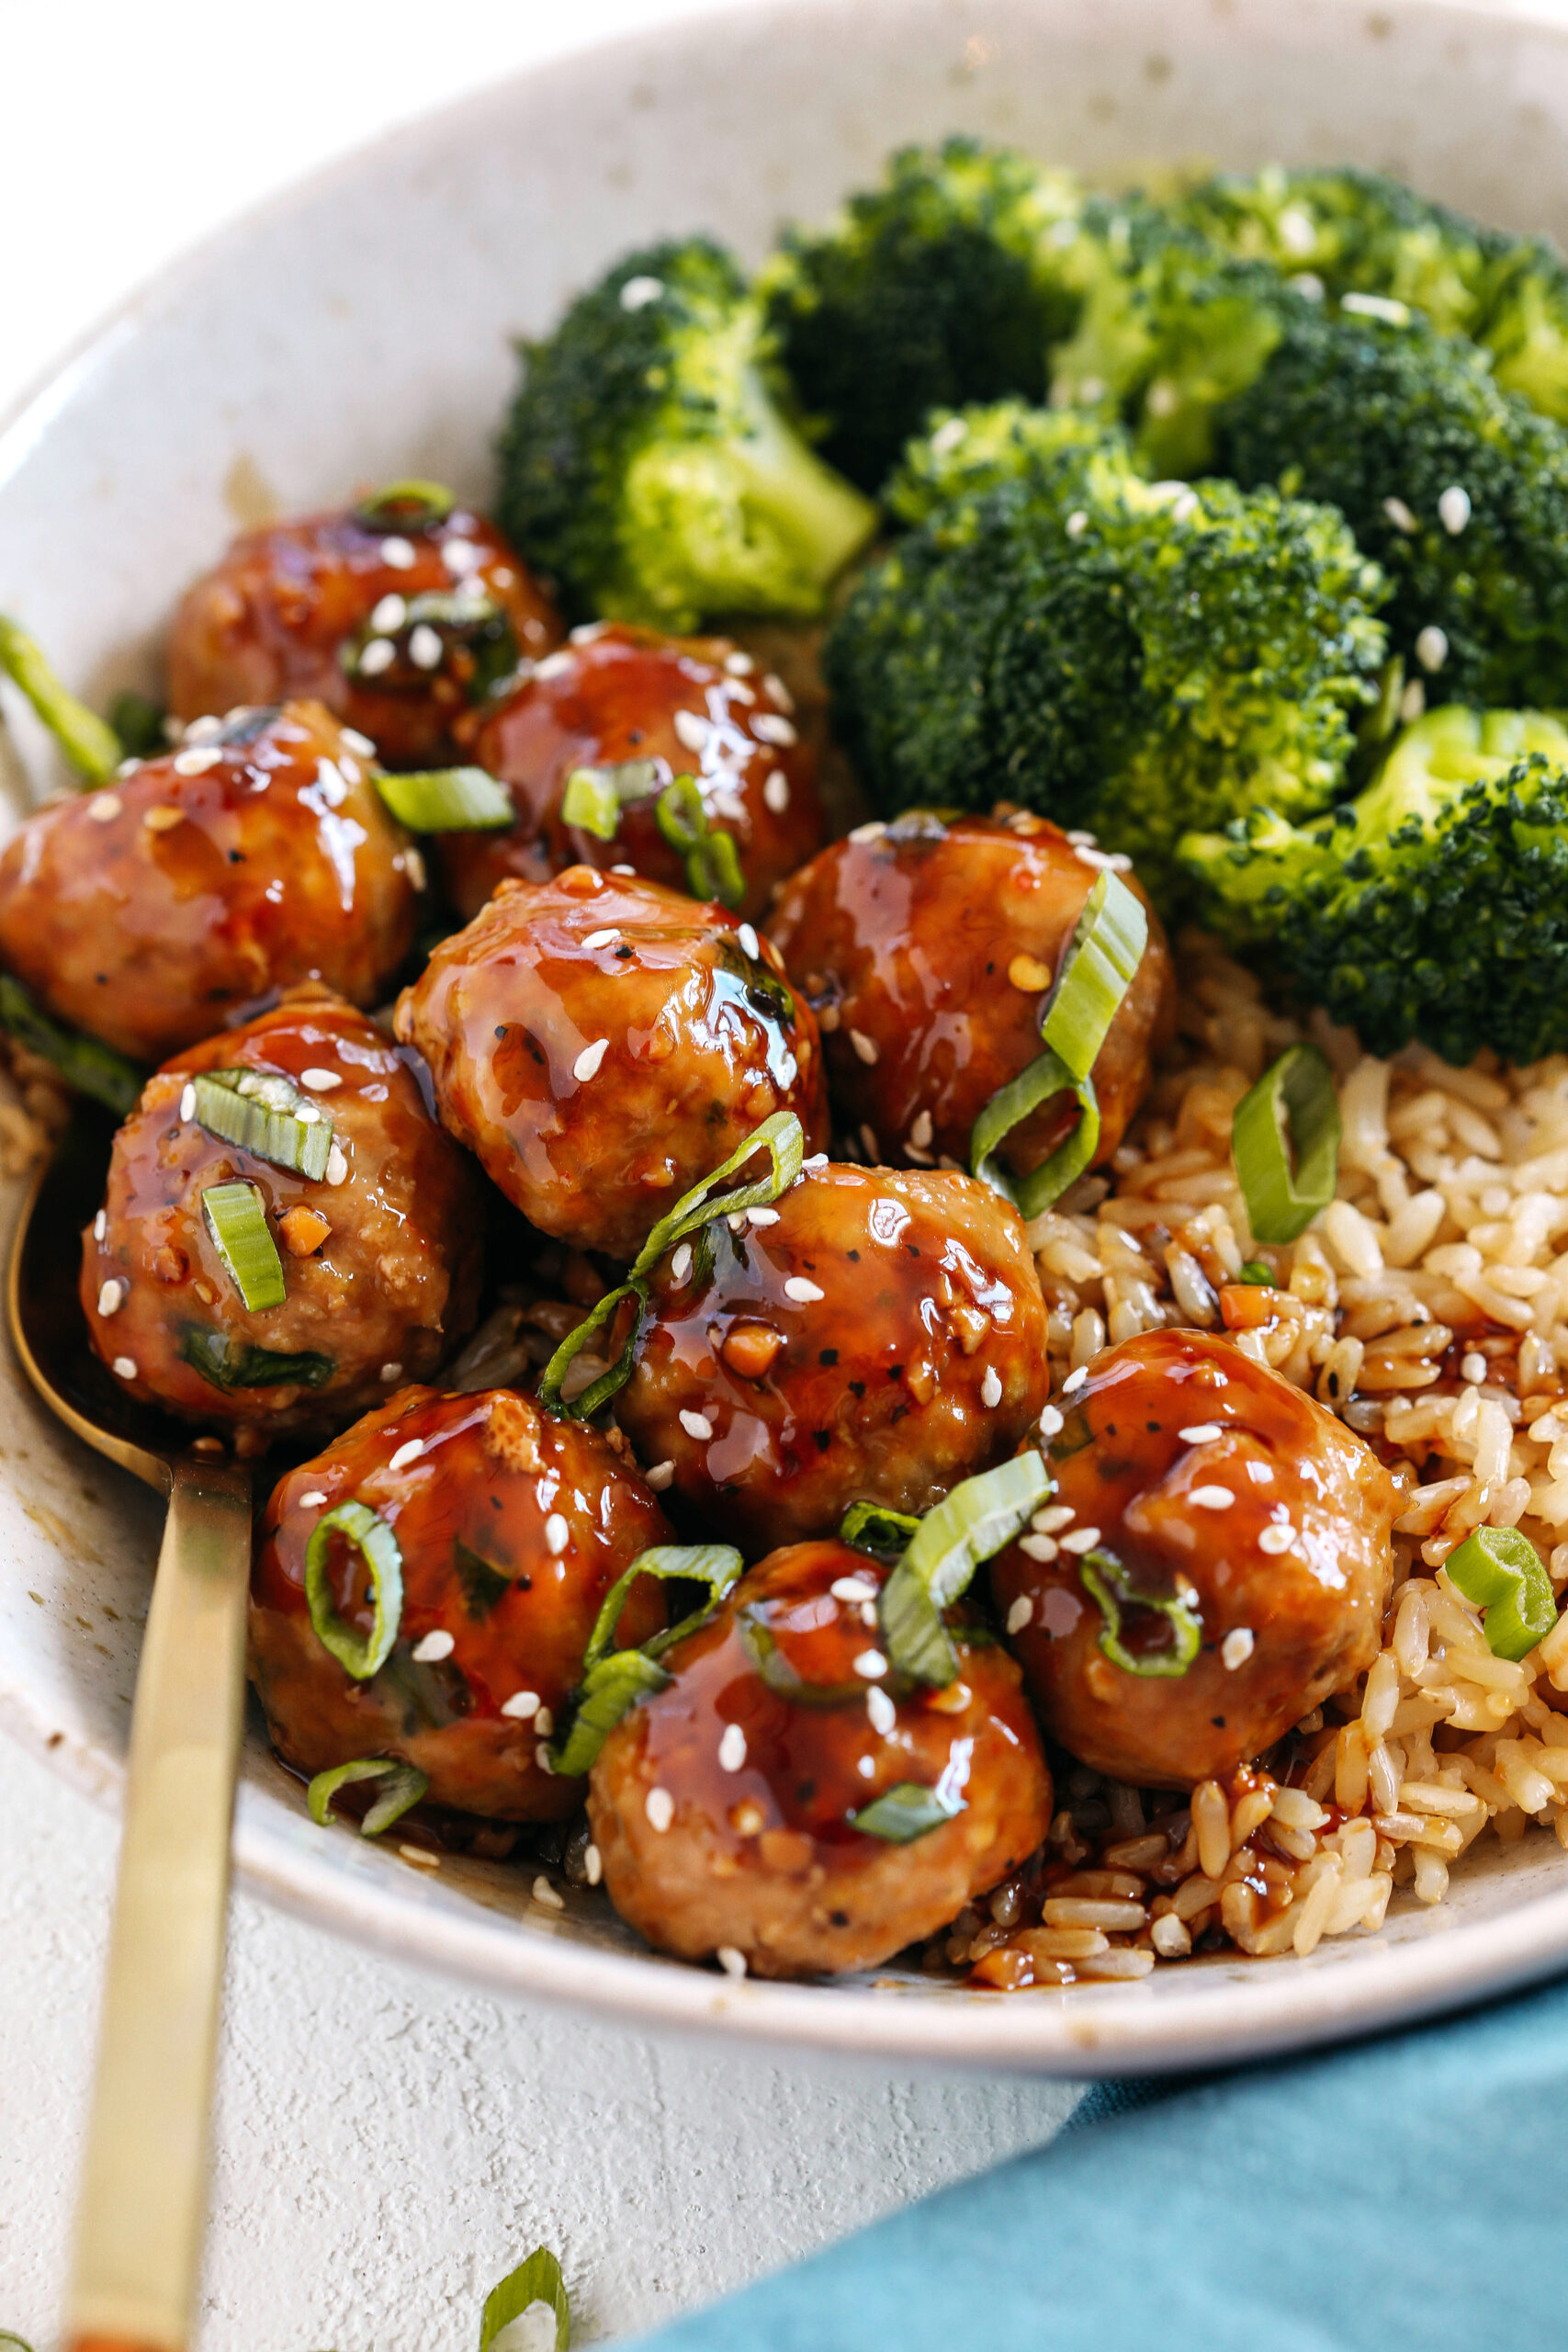 These tender Asian Glazed Turkey Meatballs are always a hit with our family!  Coated in the most delicious sticky sweet sauce and easily made in less than 30 minutes!